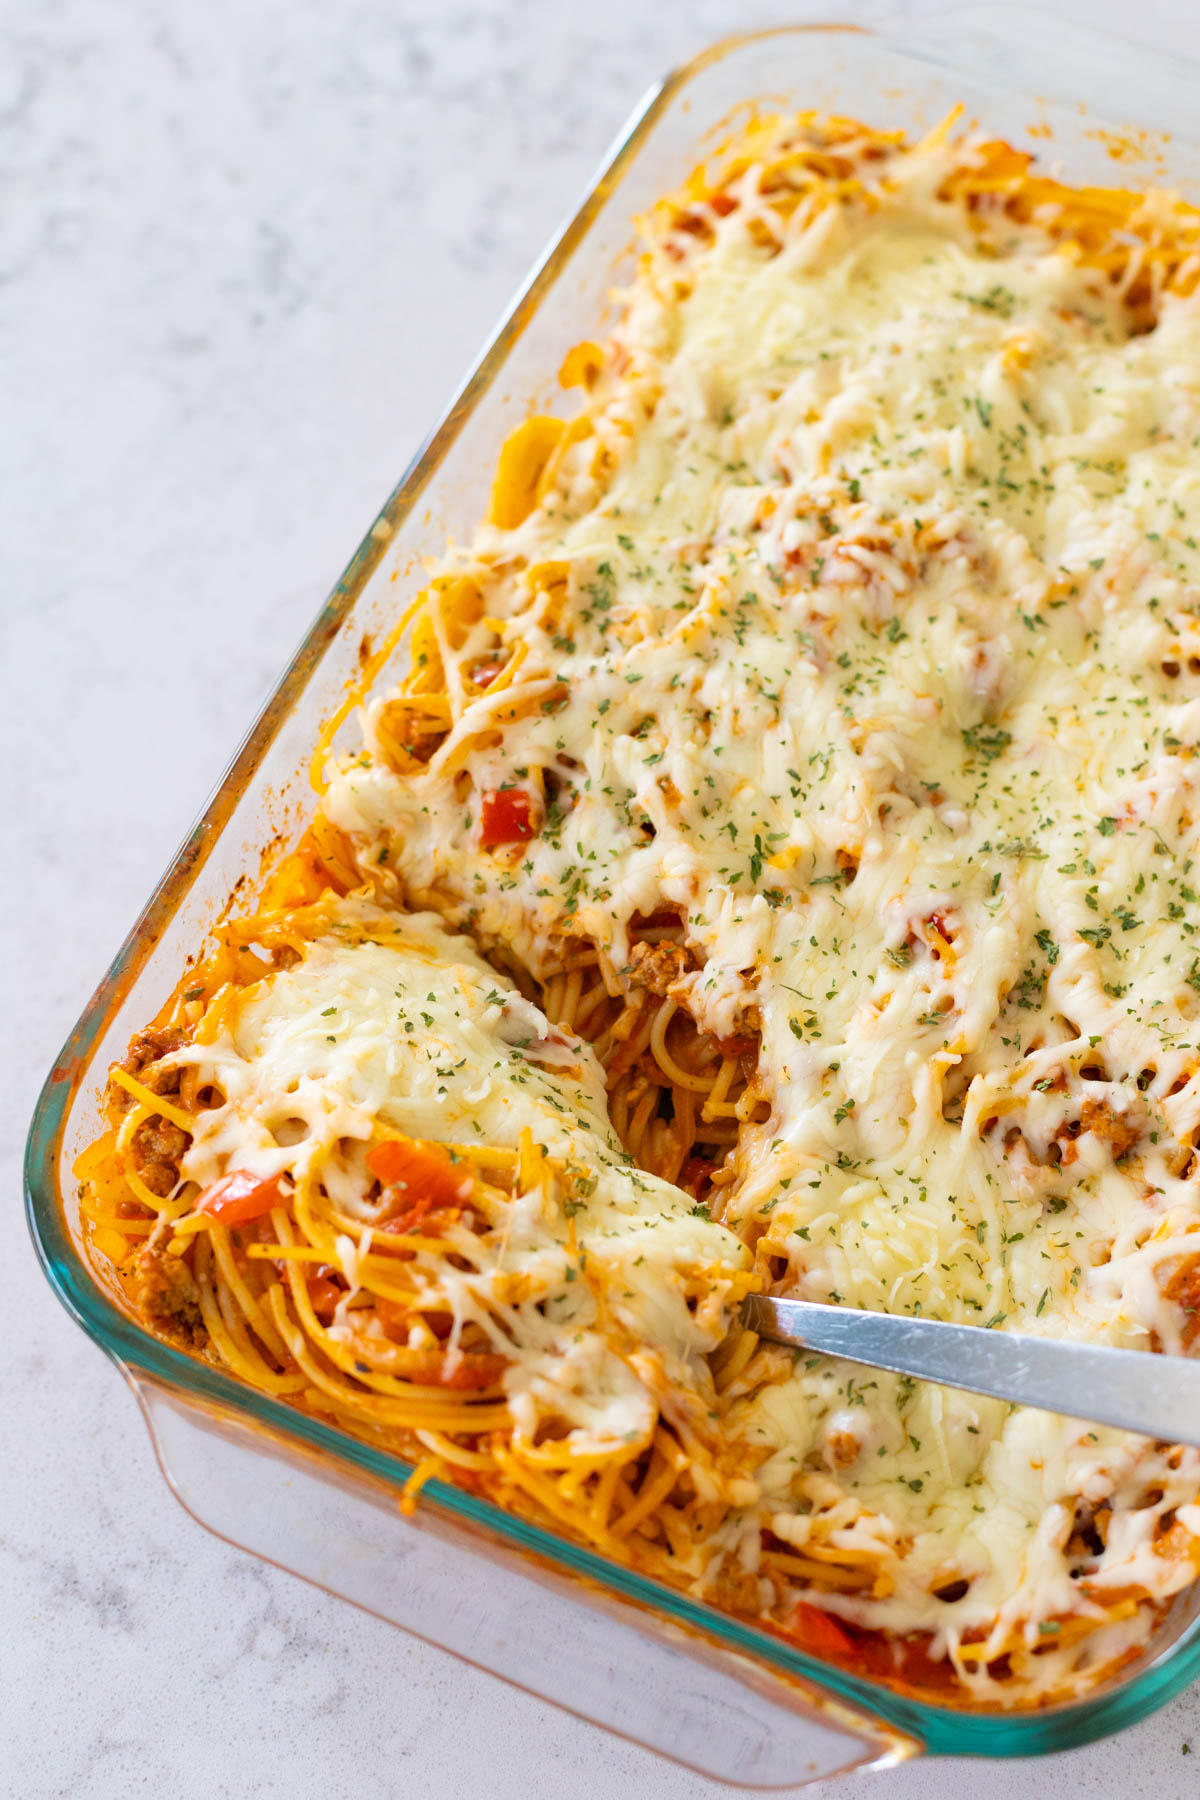 A baking dish filled with baked spaghetti topped with shredded cheese.